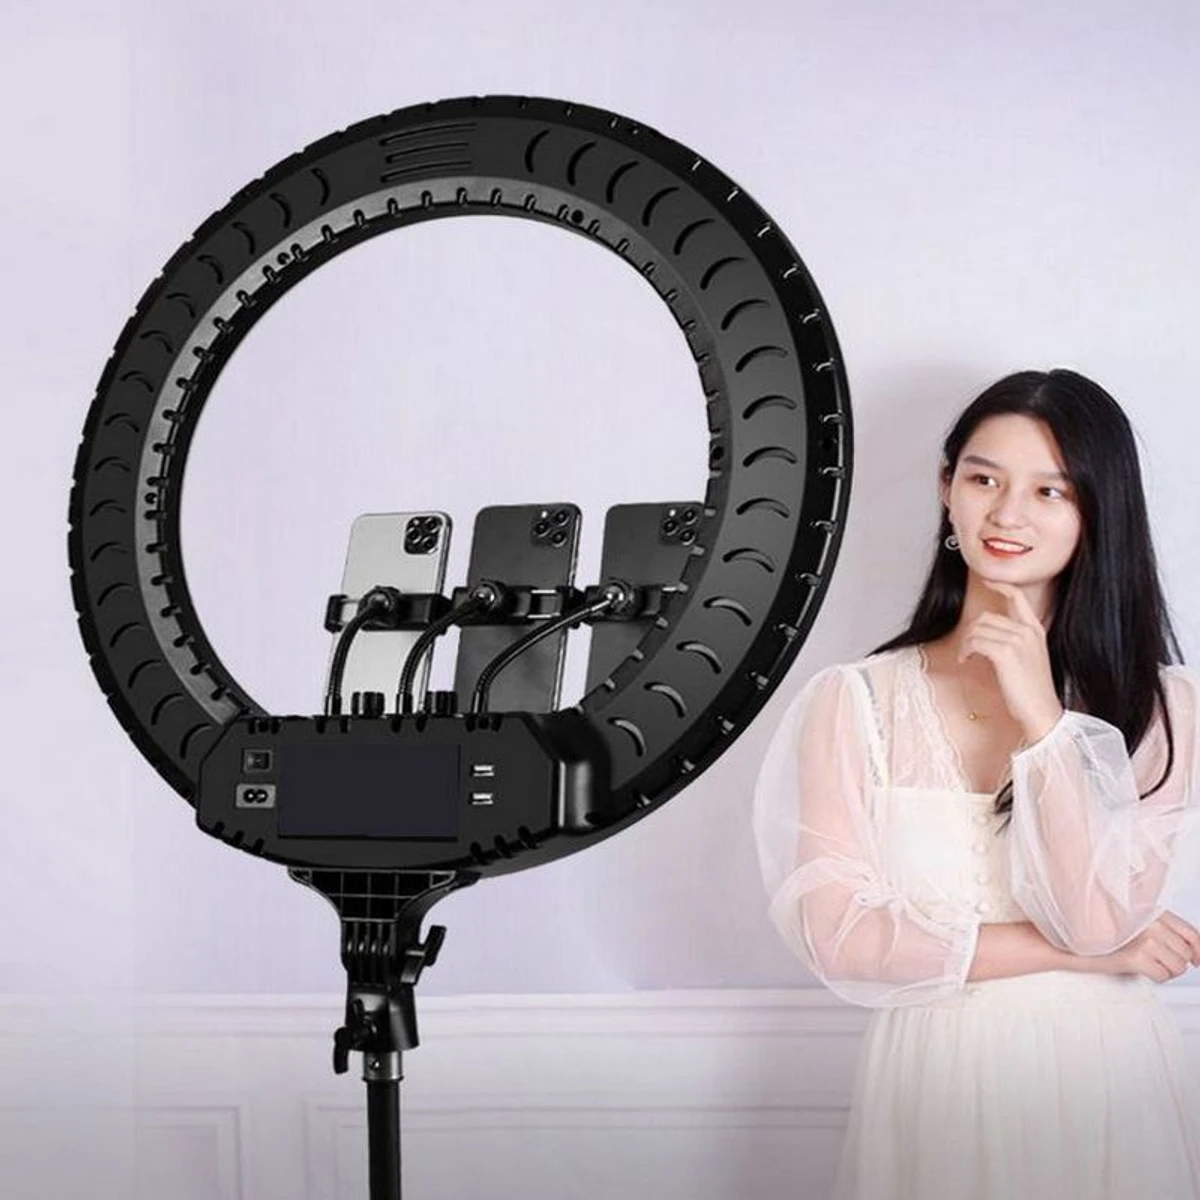 RL-21” inc Professional ring light with stand